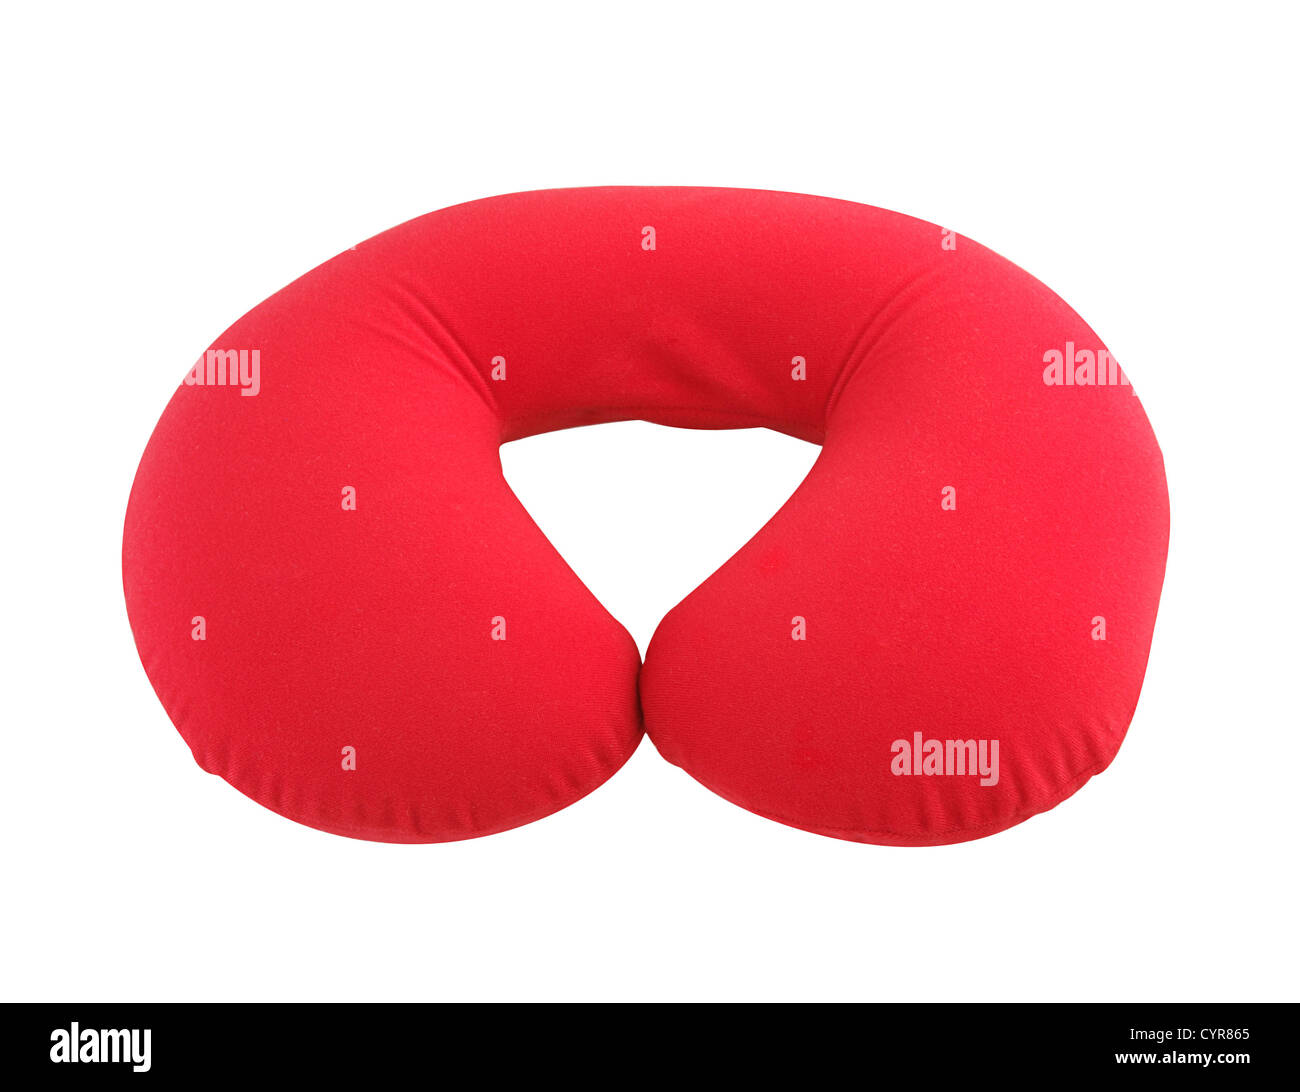 Red neck pillow for support your neck while traveling Stock Photo